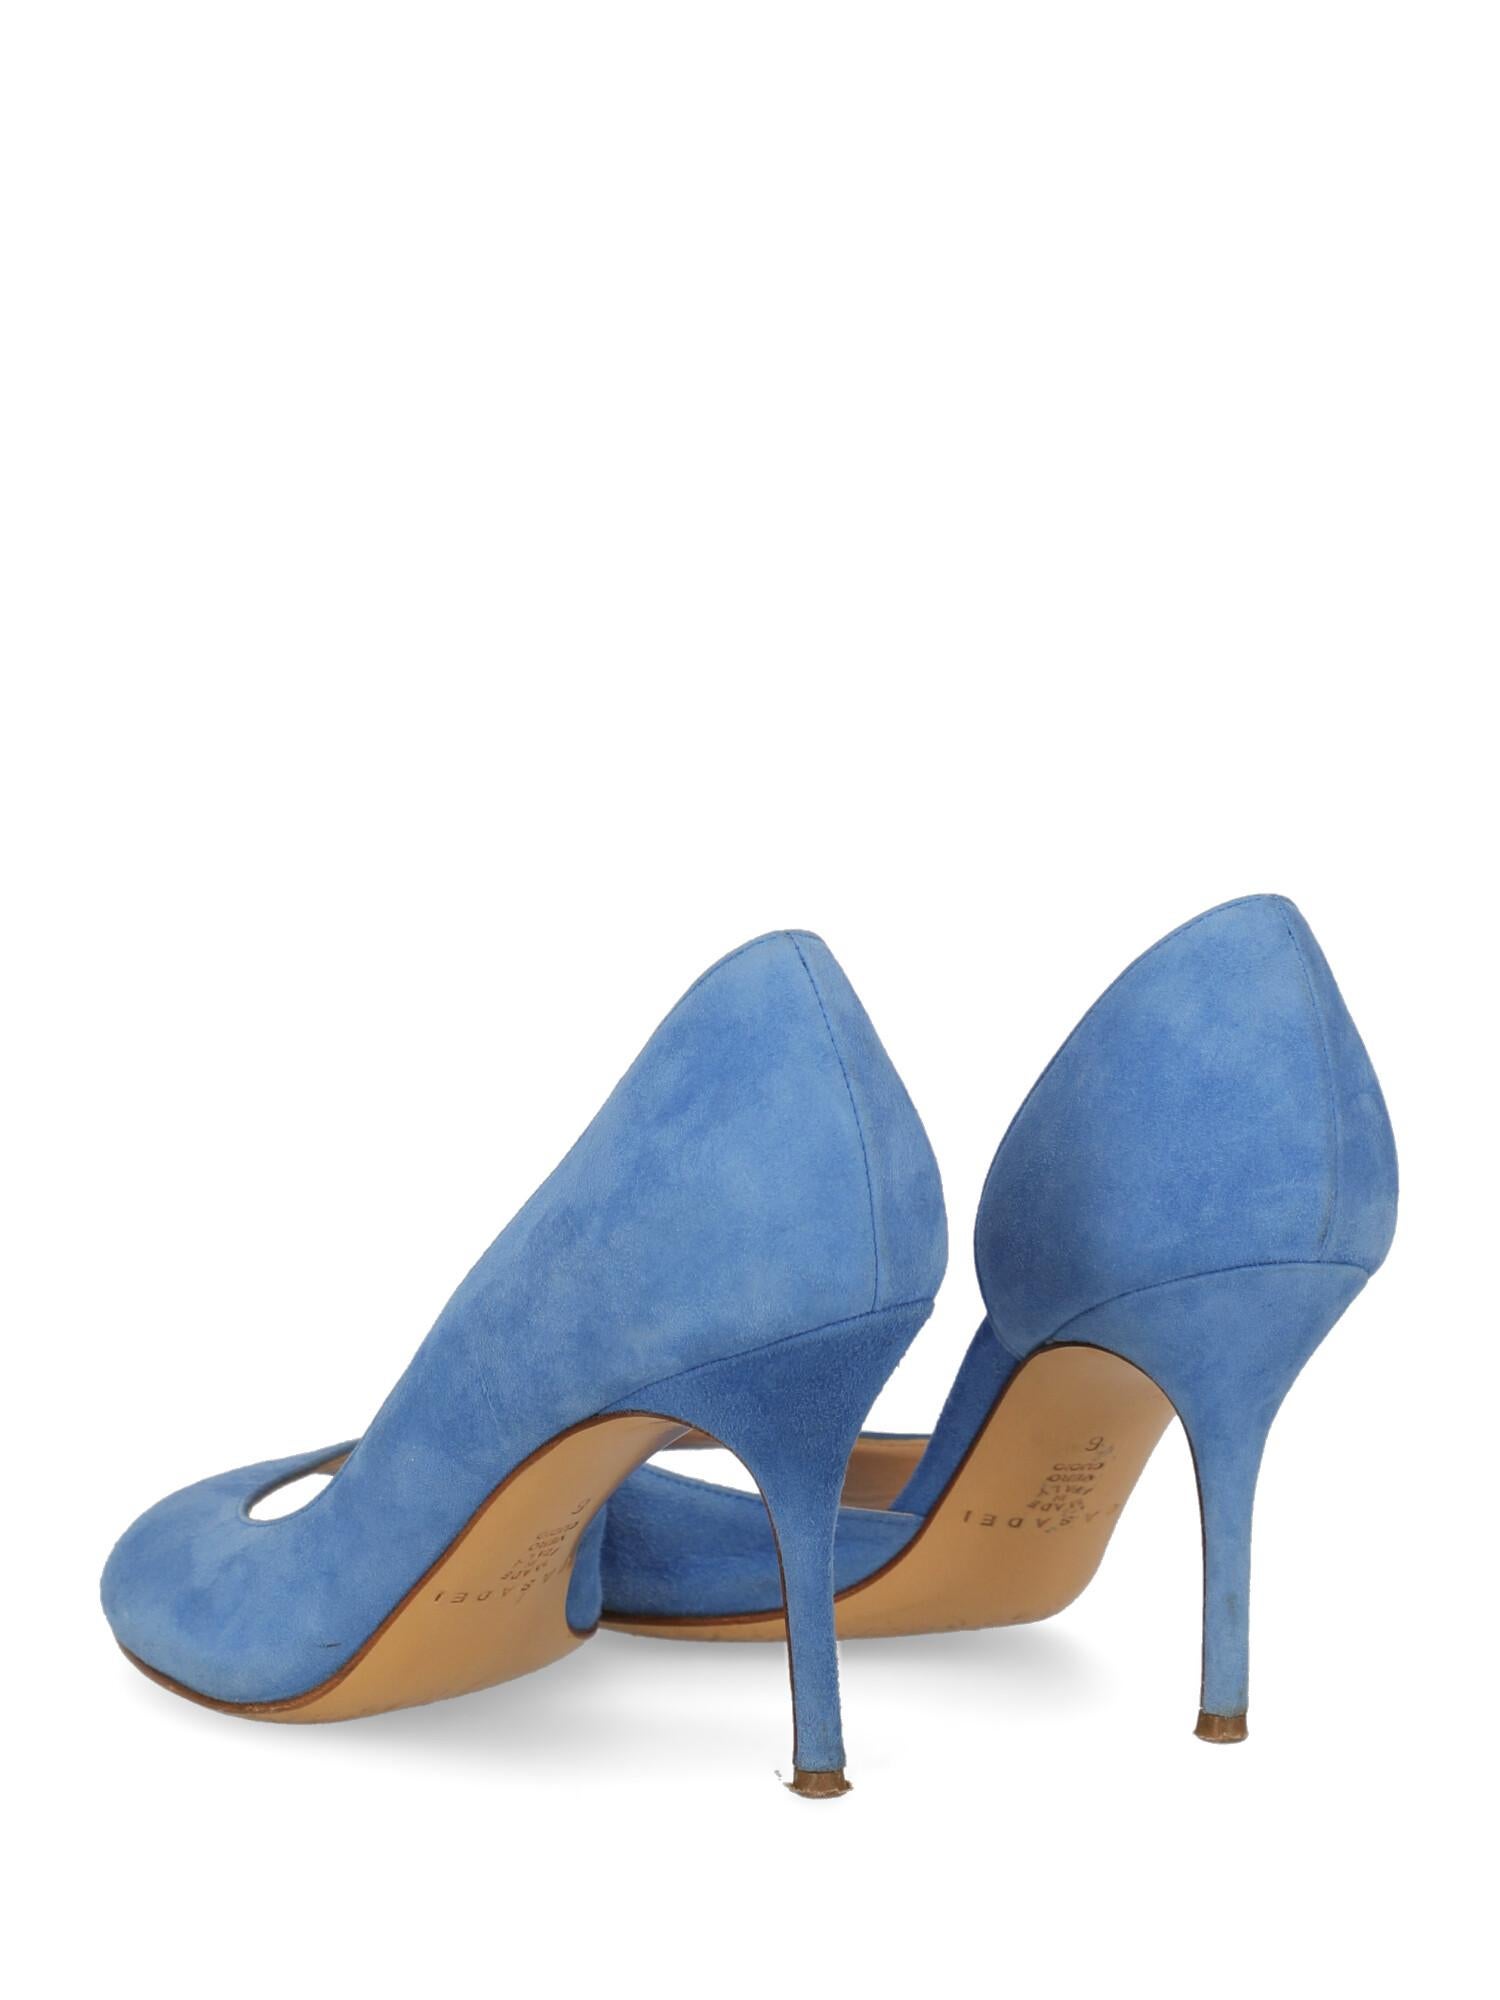 Casadei Woman Pumps Blue Leather US 6 In Fair Condition For Sale In Milan, IT